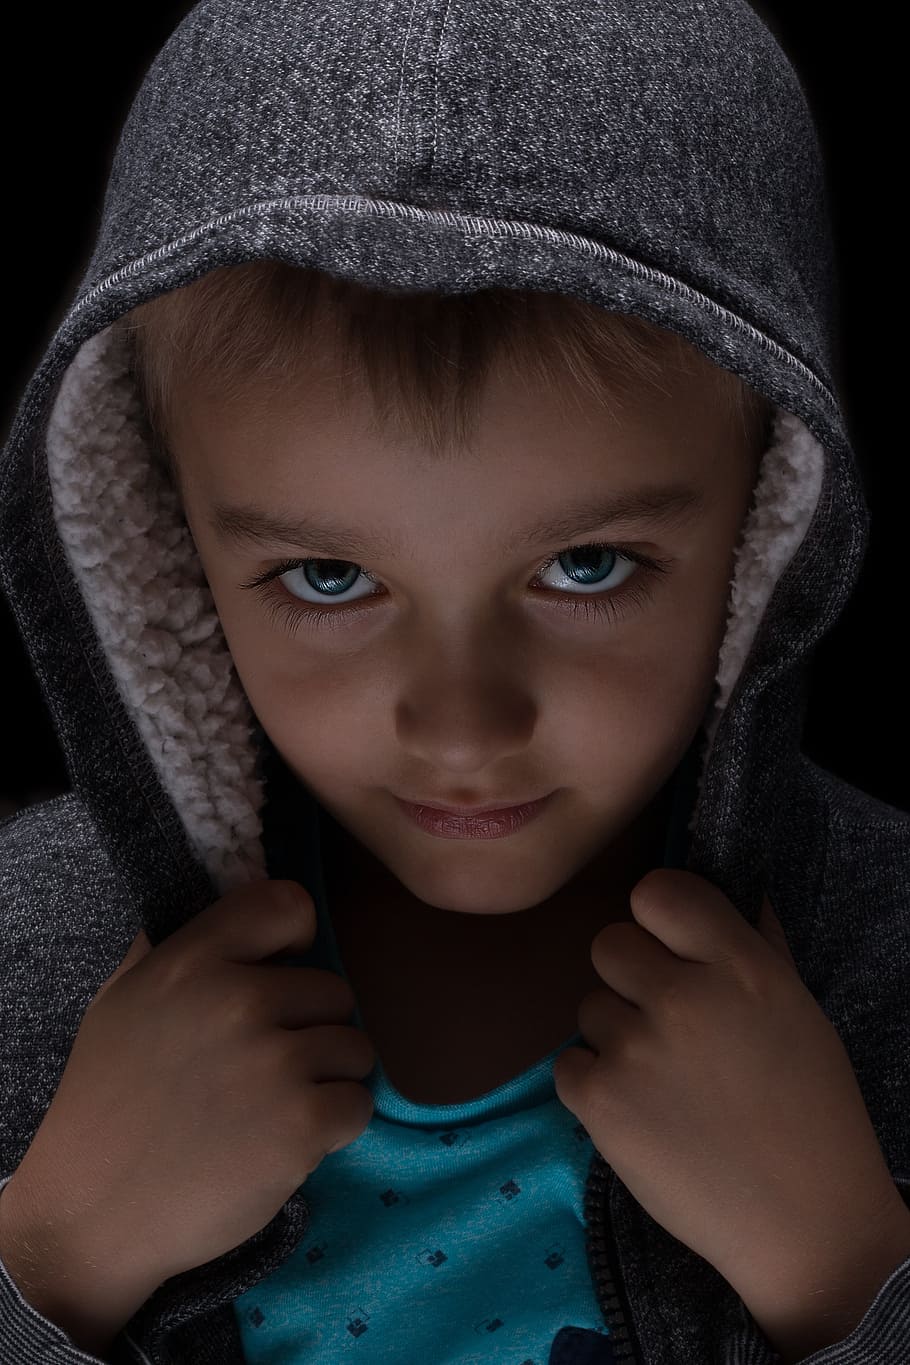 speed light, moody, boy, hoodie, young, face, eyes, conceptual